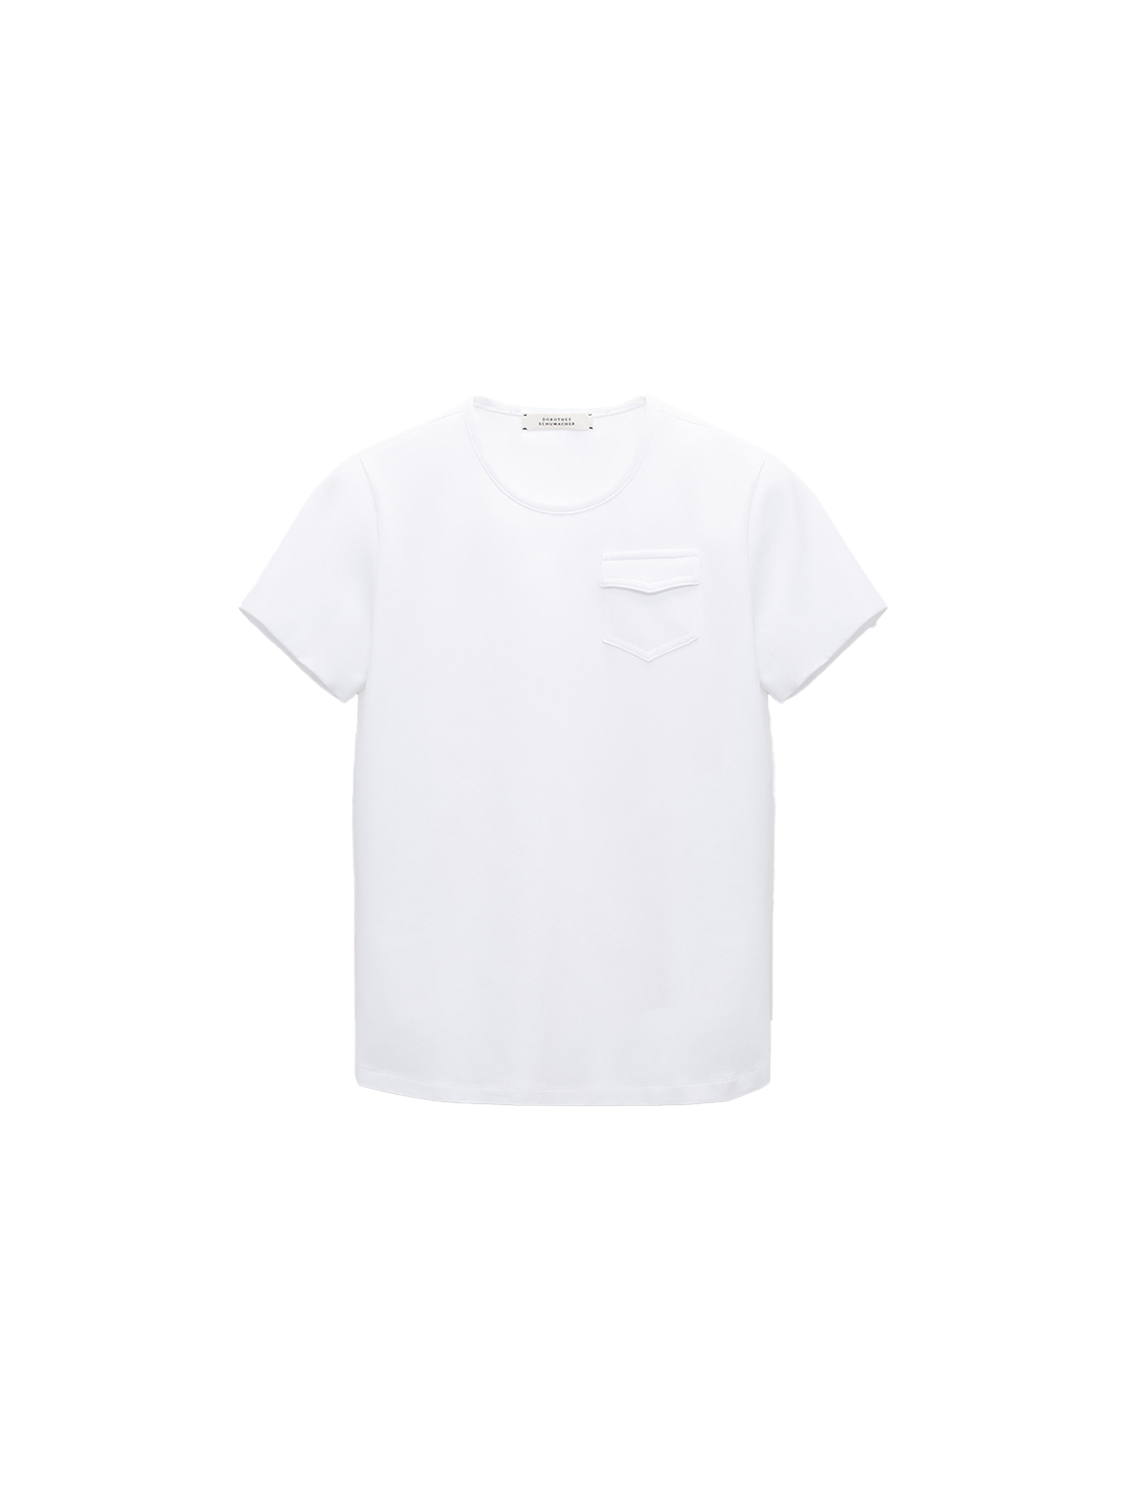 Dorothee Schumacher All Time Favorite – Stretchy cotton shirt  white XS